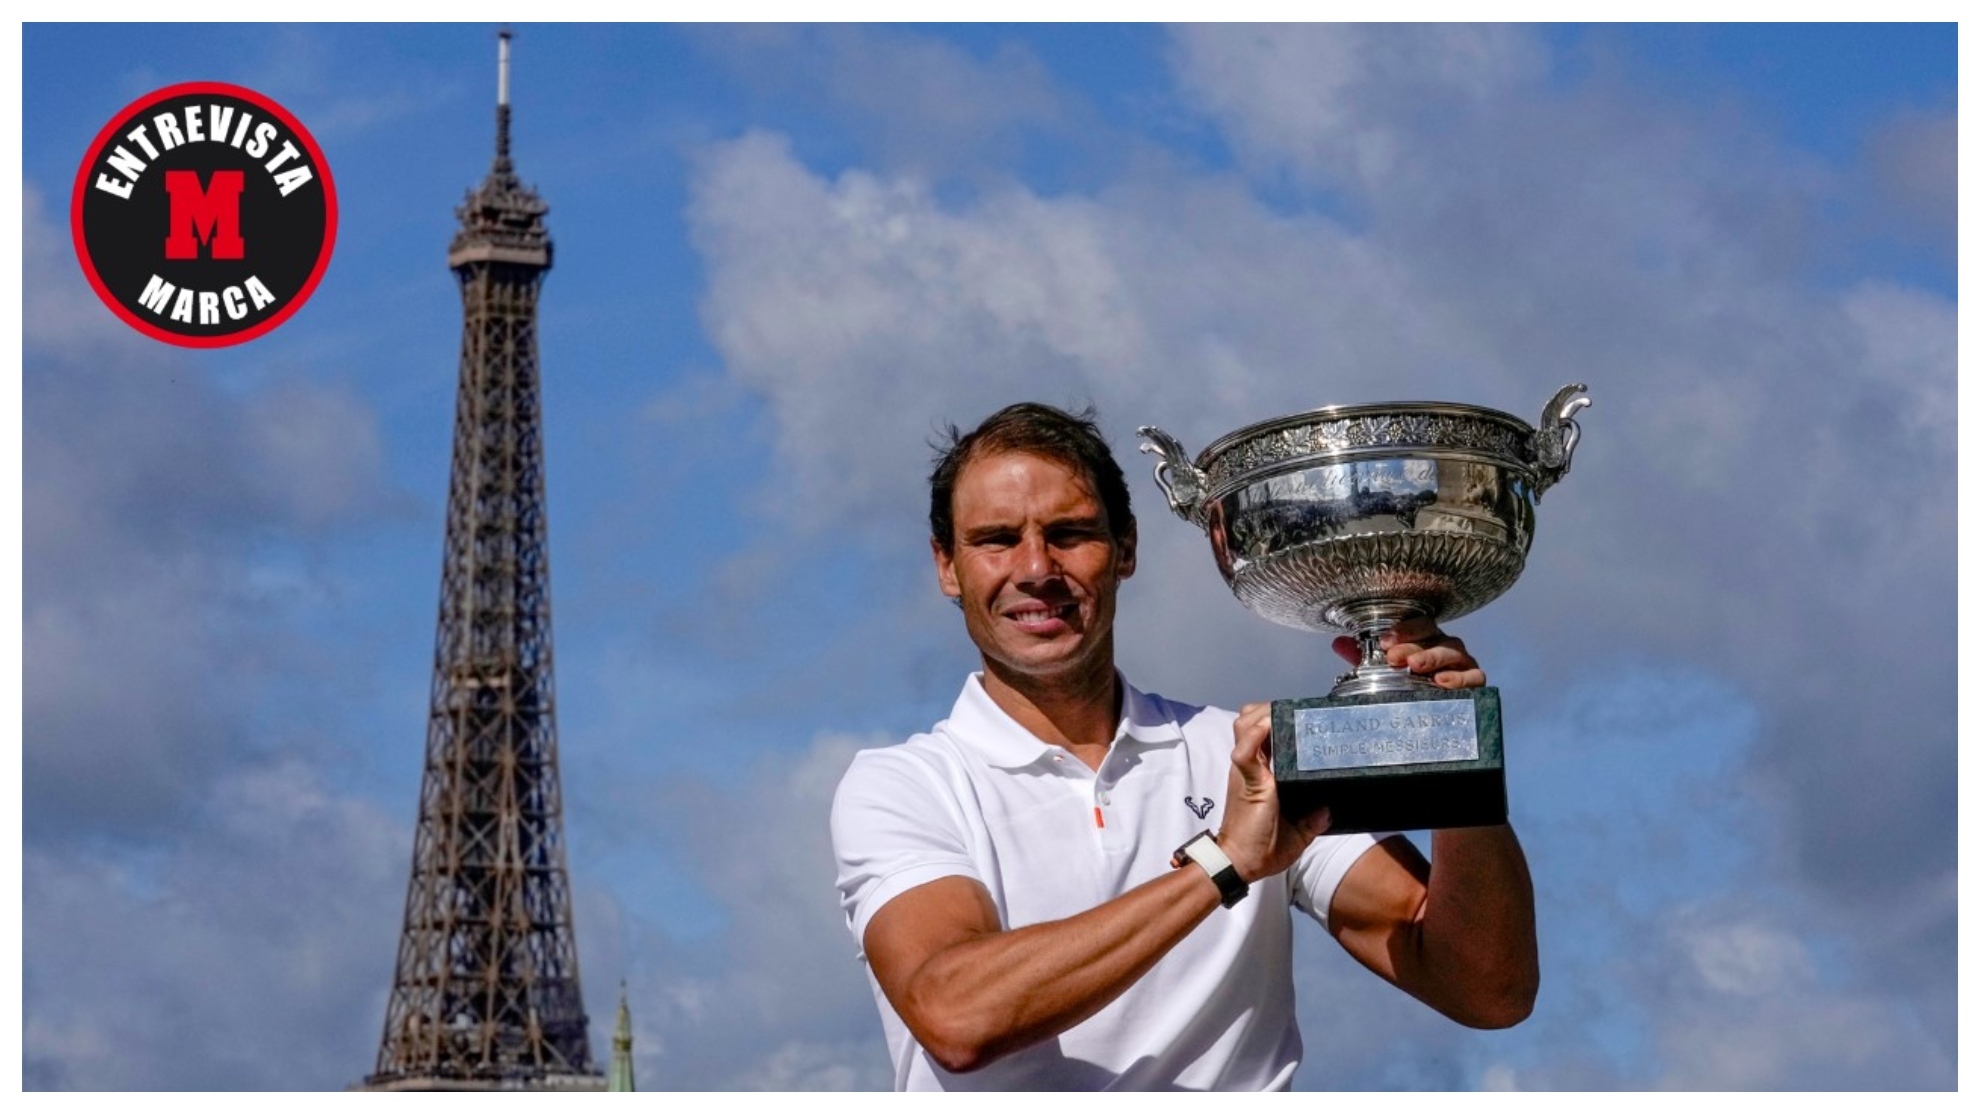 Nadal with the French Open trophy.